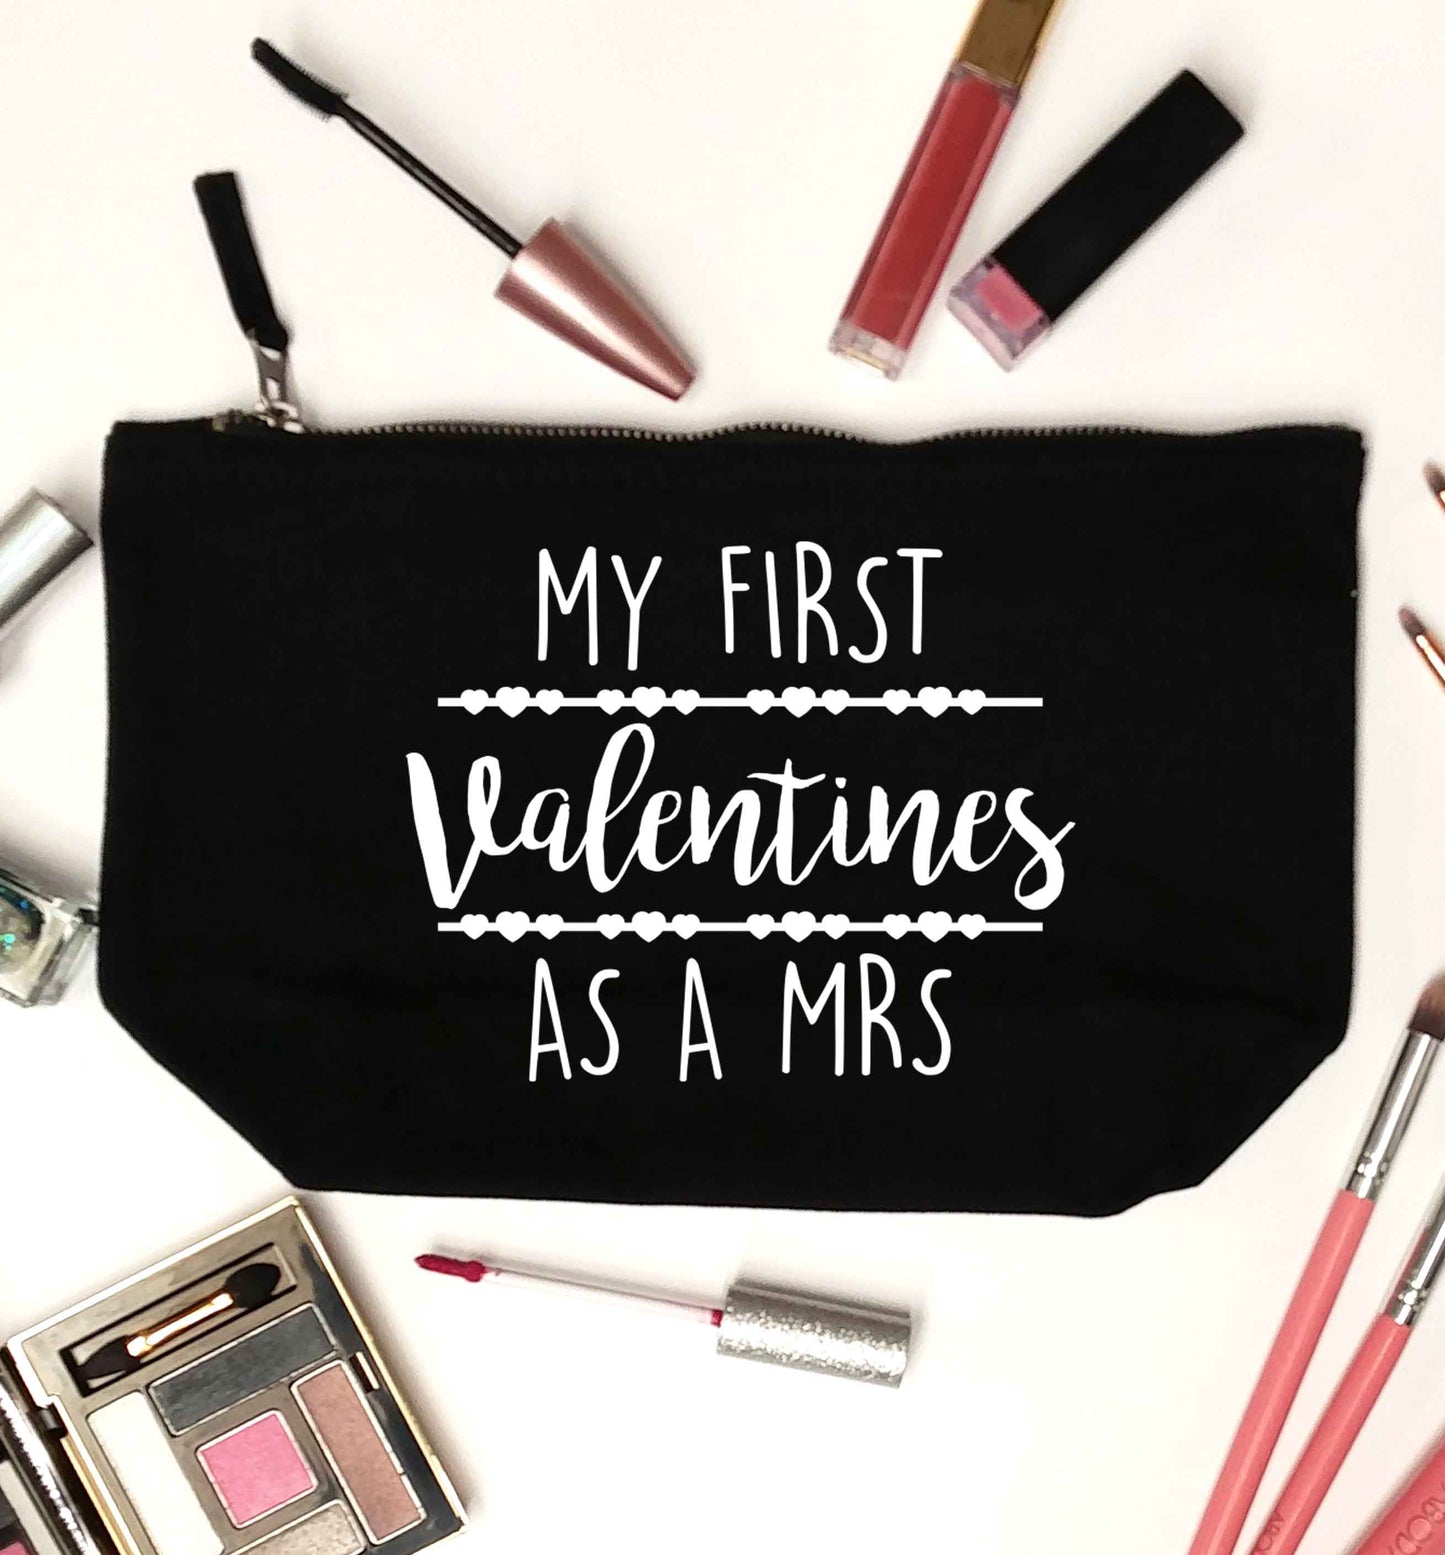 My first valentines as a Mrs black makeup bag